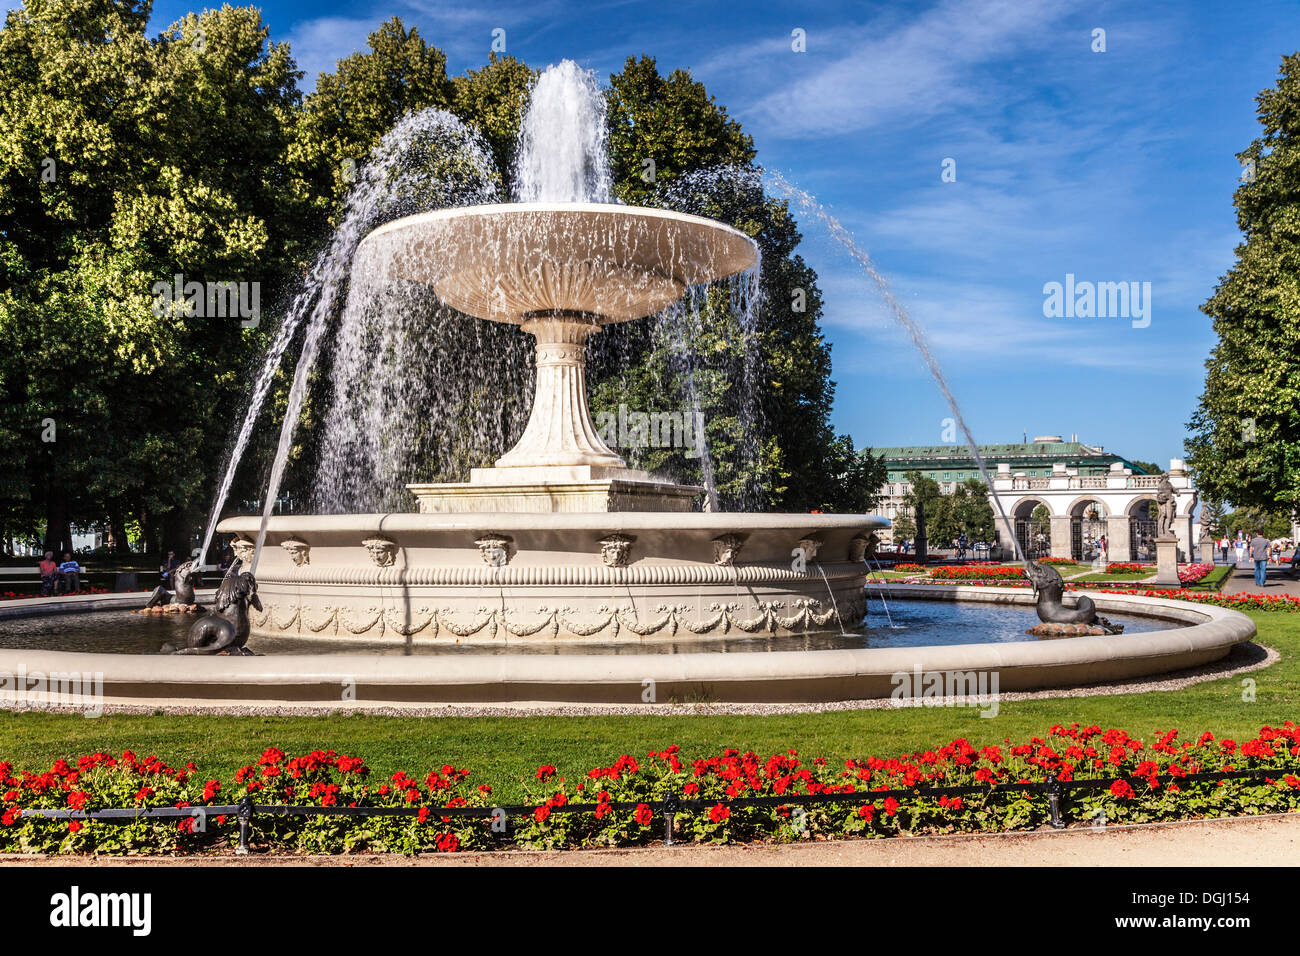 Fountain in Ogrod Saski in Warsaw with the Tomb of the Unknown Soldier in Pilsudski Square beyond. Stock Photo